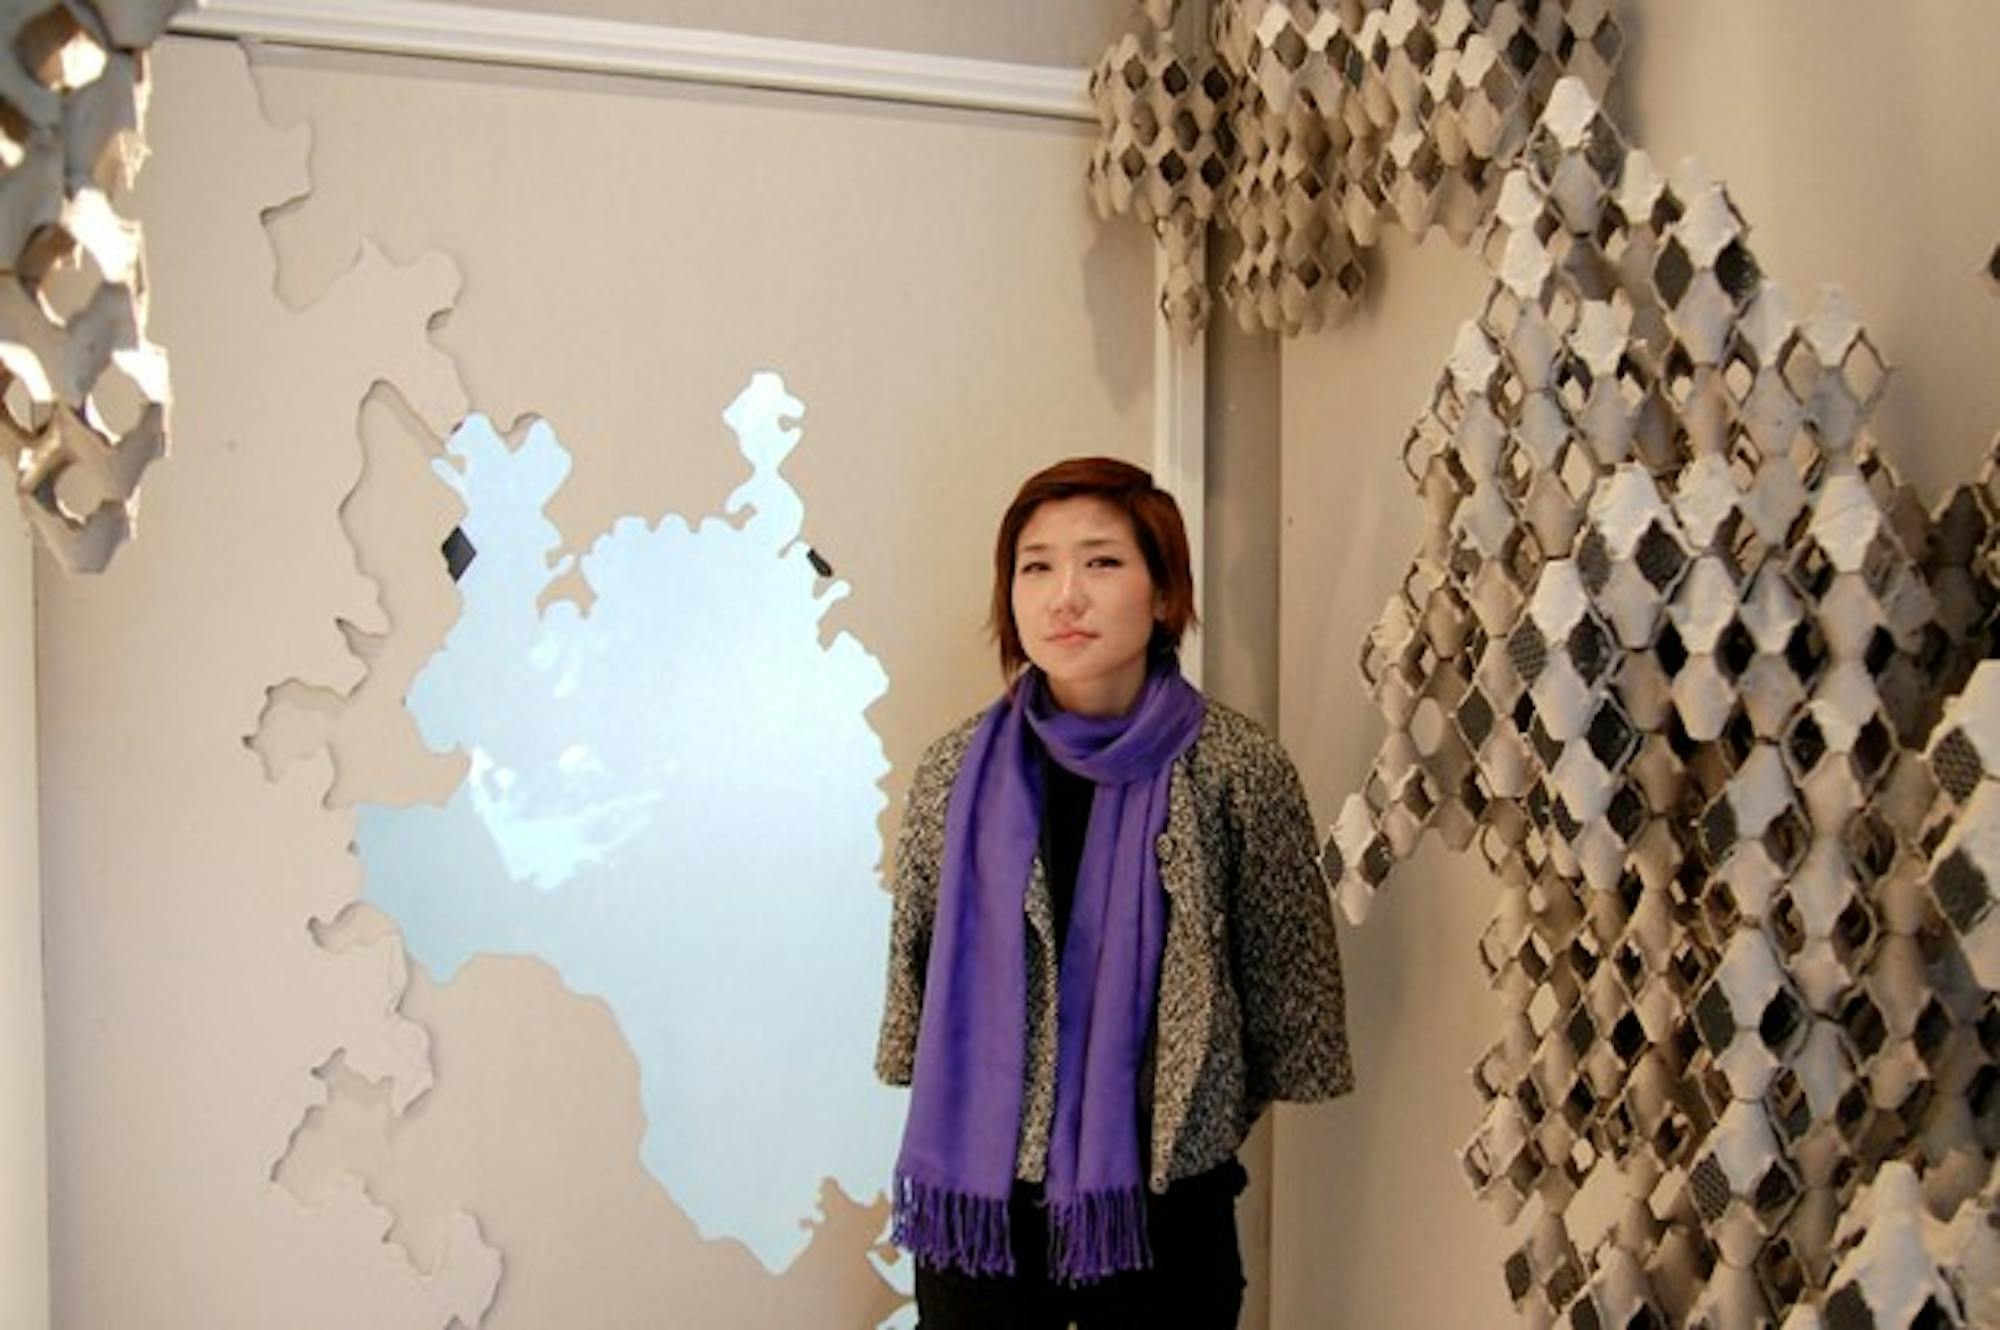 Professor Soo Sunny Park used egg crates and dry wall to construct 